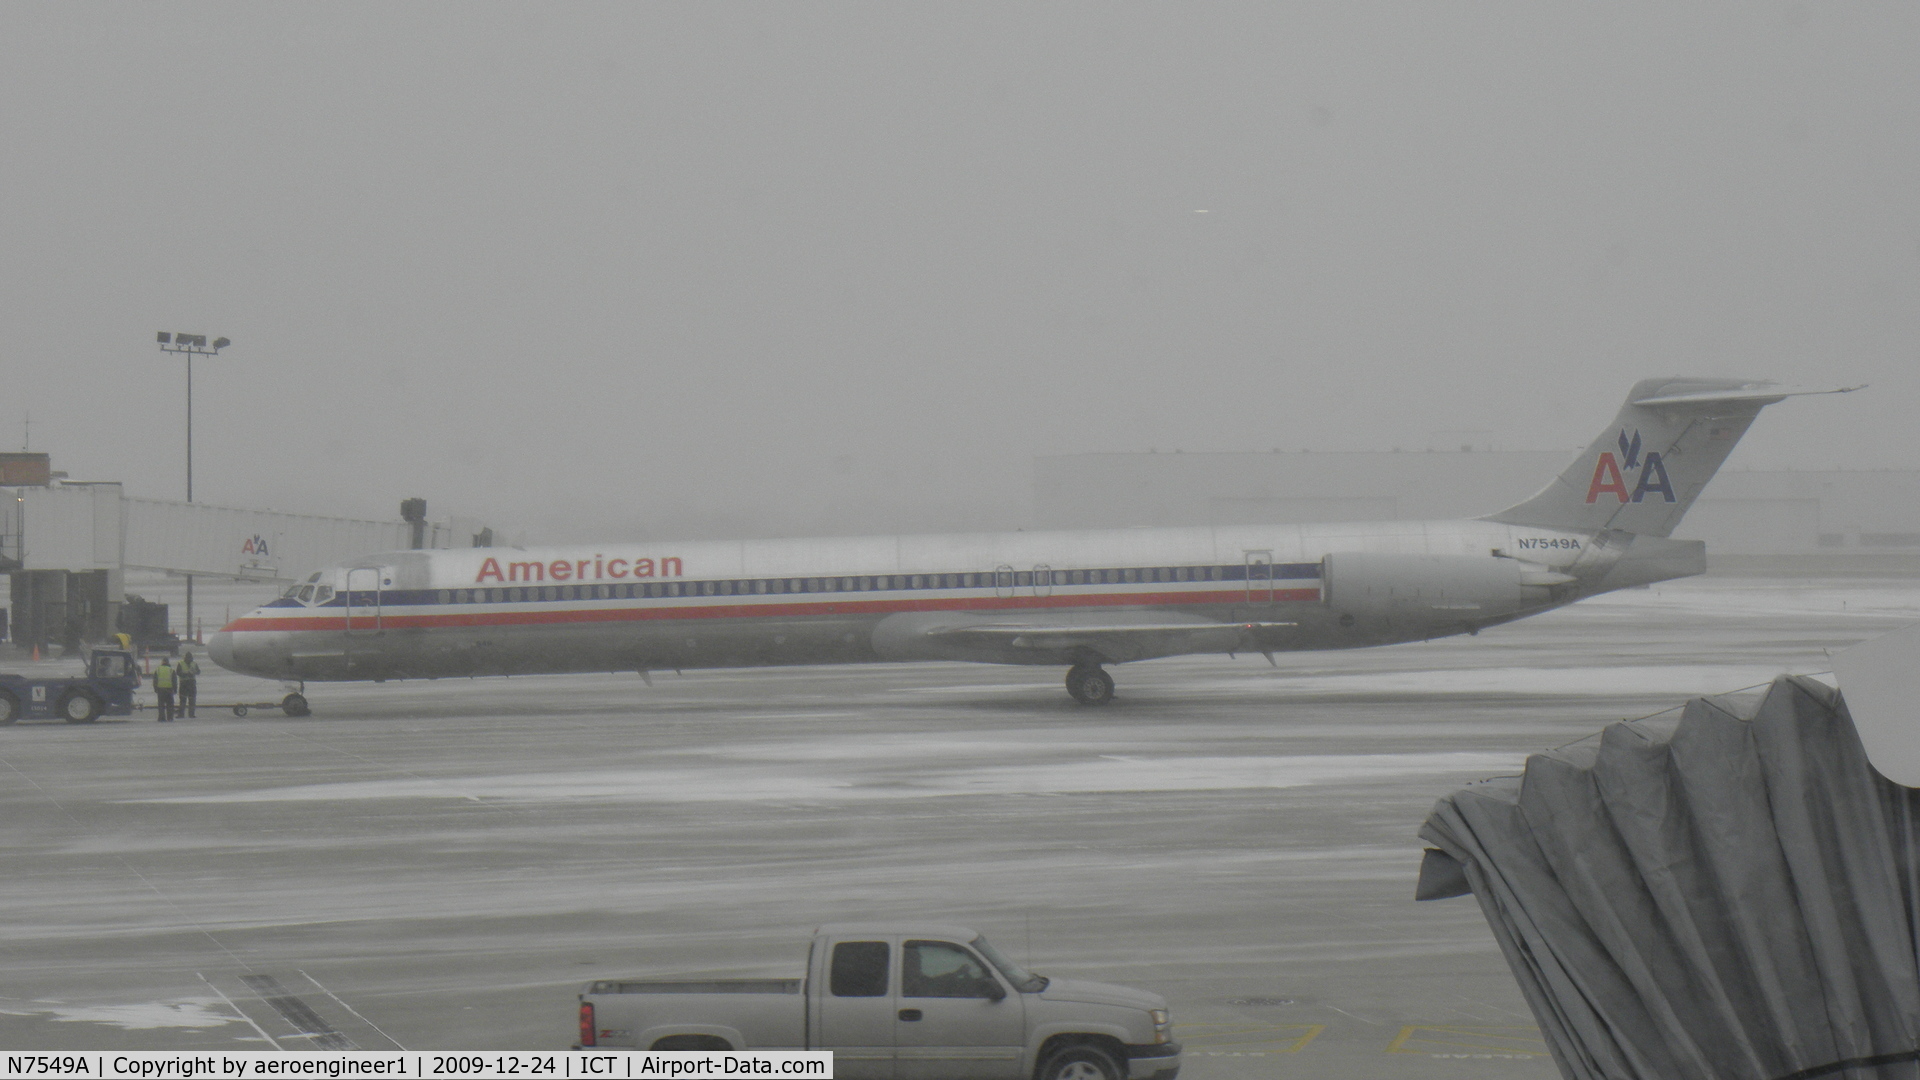 N7549A, 1991 McDonnell Douglas MD-82 (DC-9-82) C/N 53031, AA MD-82 at Wichita Airport on Christmas Eve... Snowstorm is just starting.